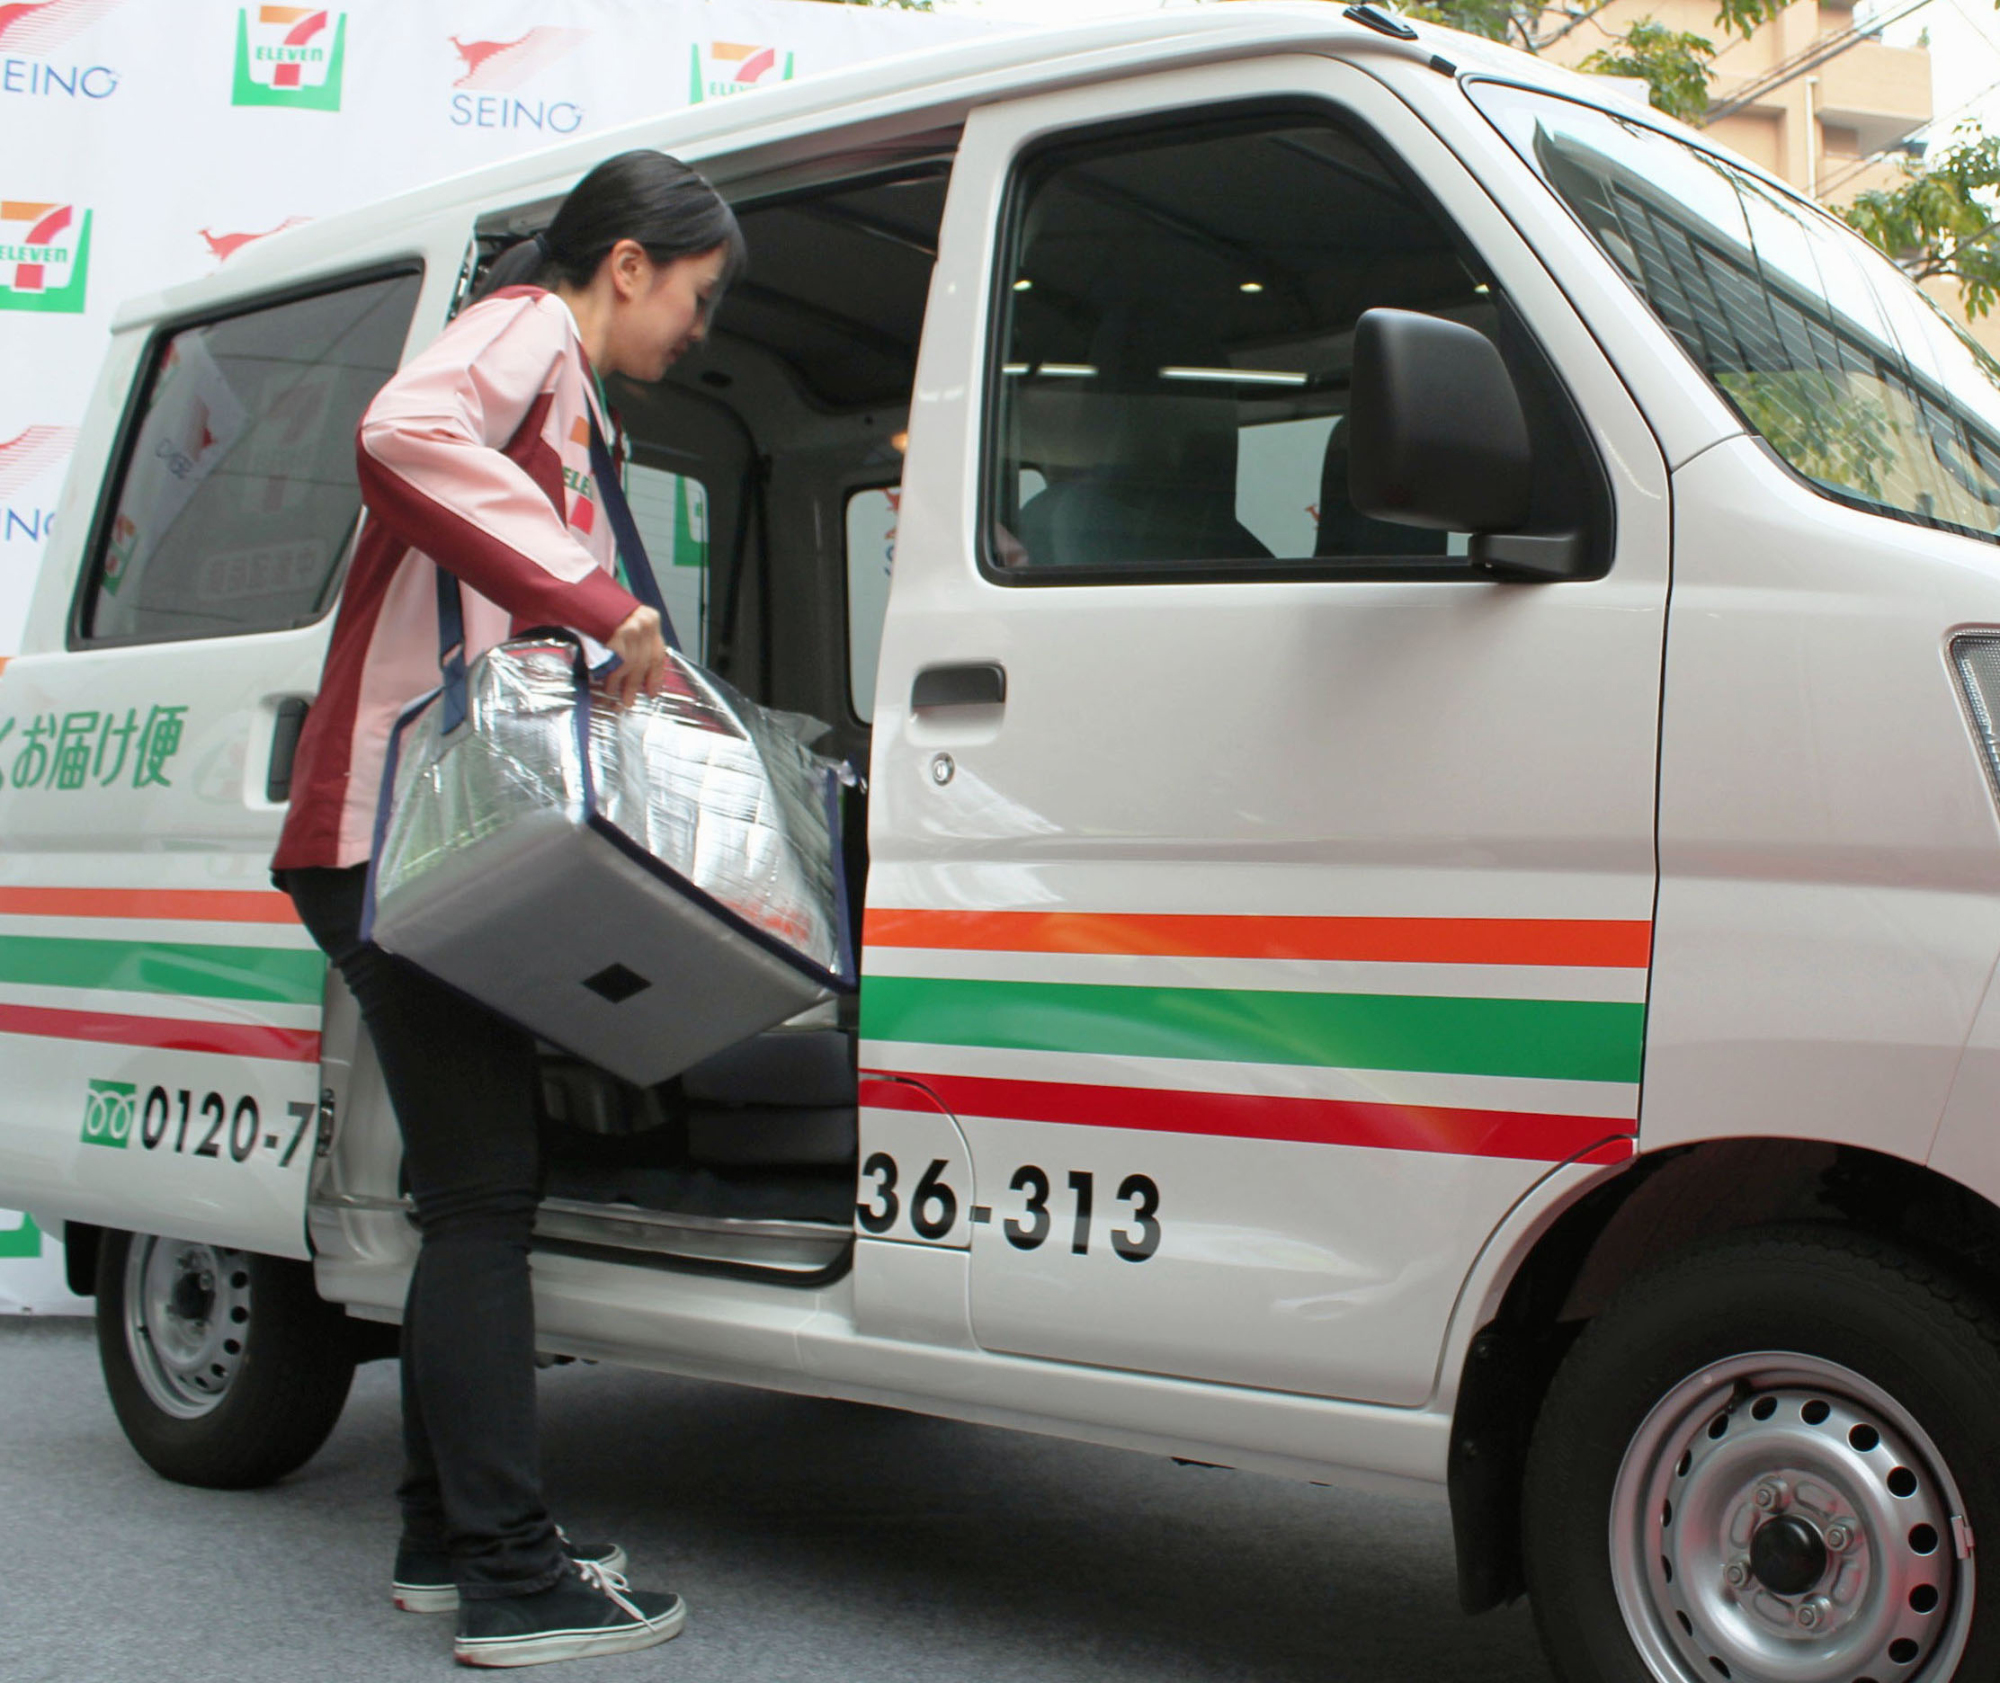 A Seven-Eleven Japan Co. employee demonstrates a delivery service launched in a tie-up with trucking firm Seino Holdings Co. to deliver lunch boxes and other products. | KYODO